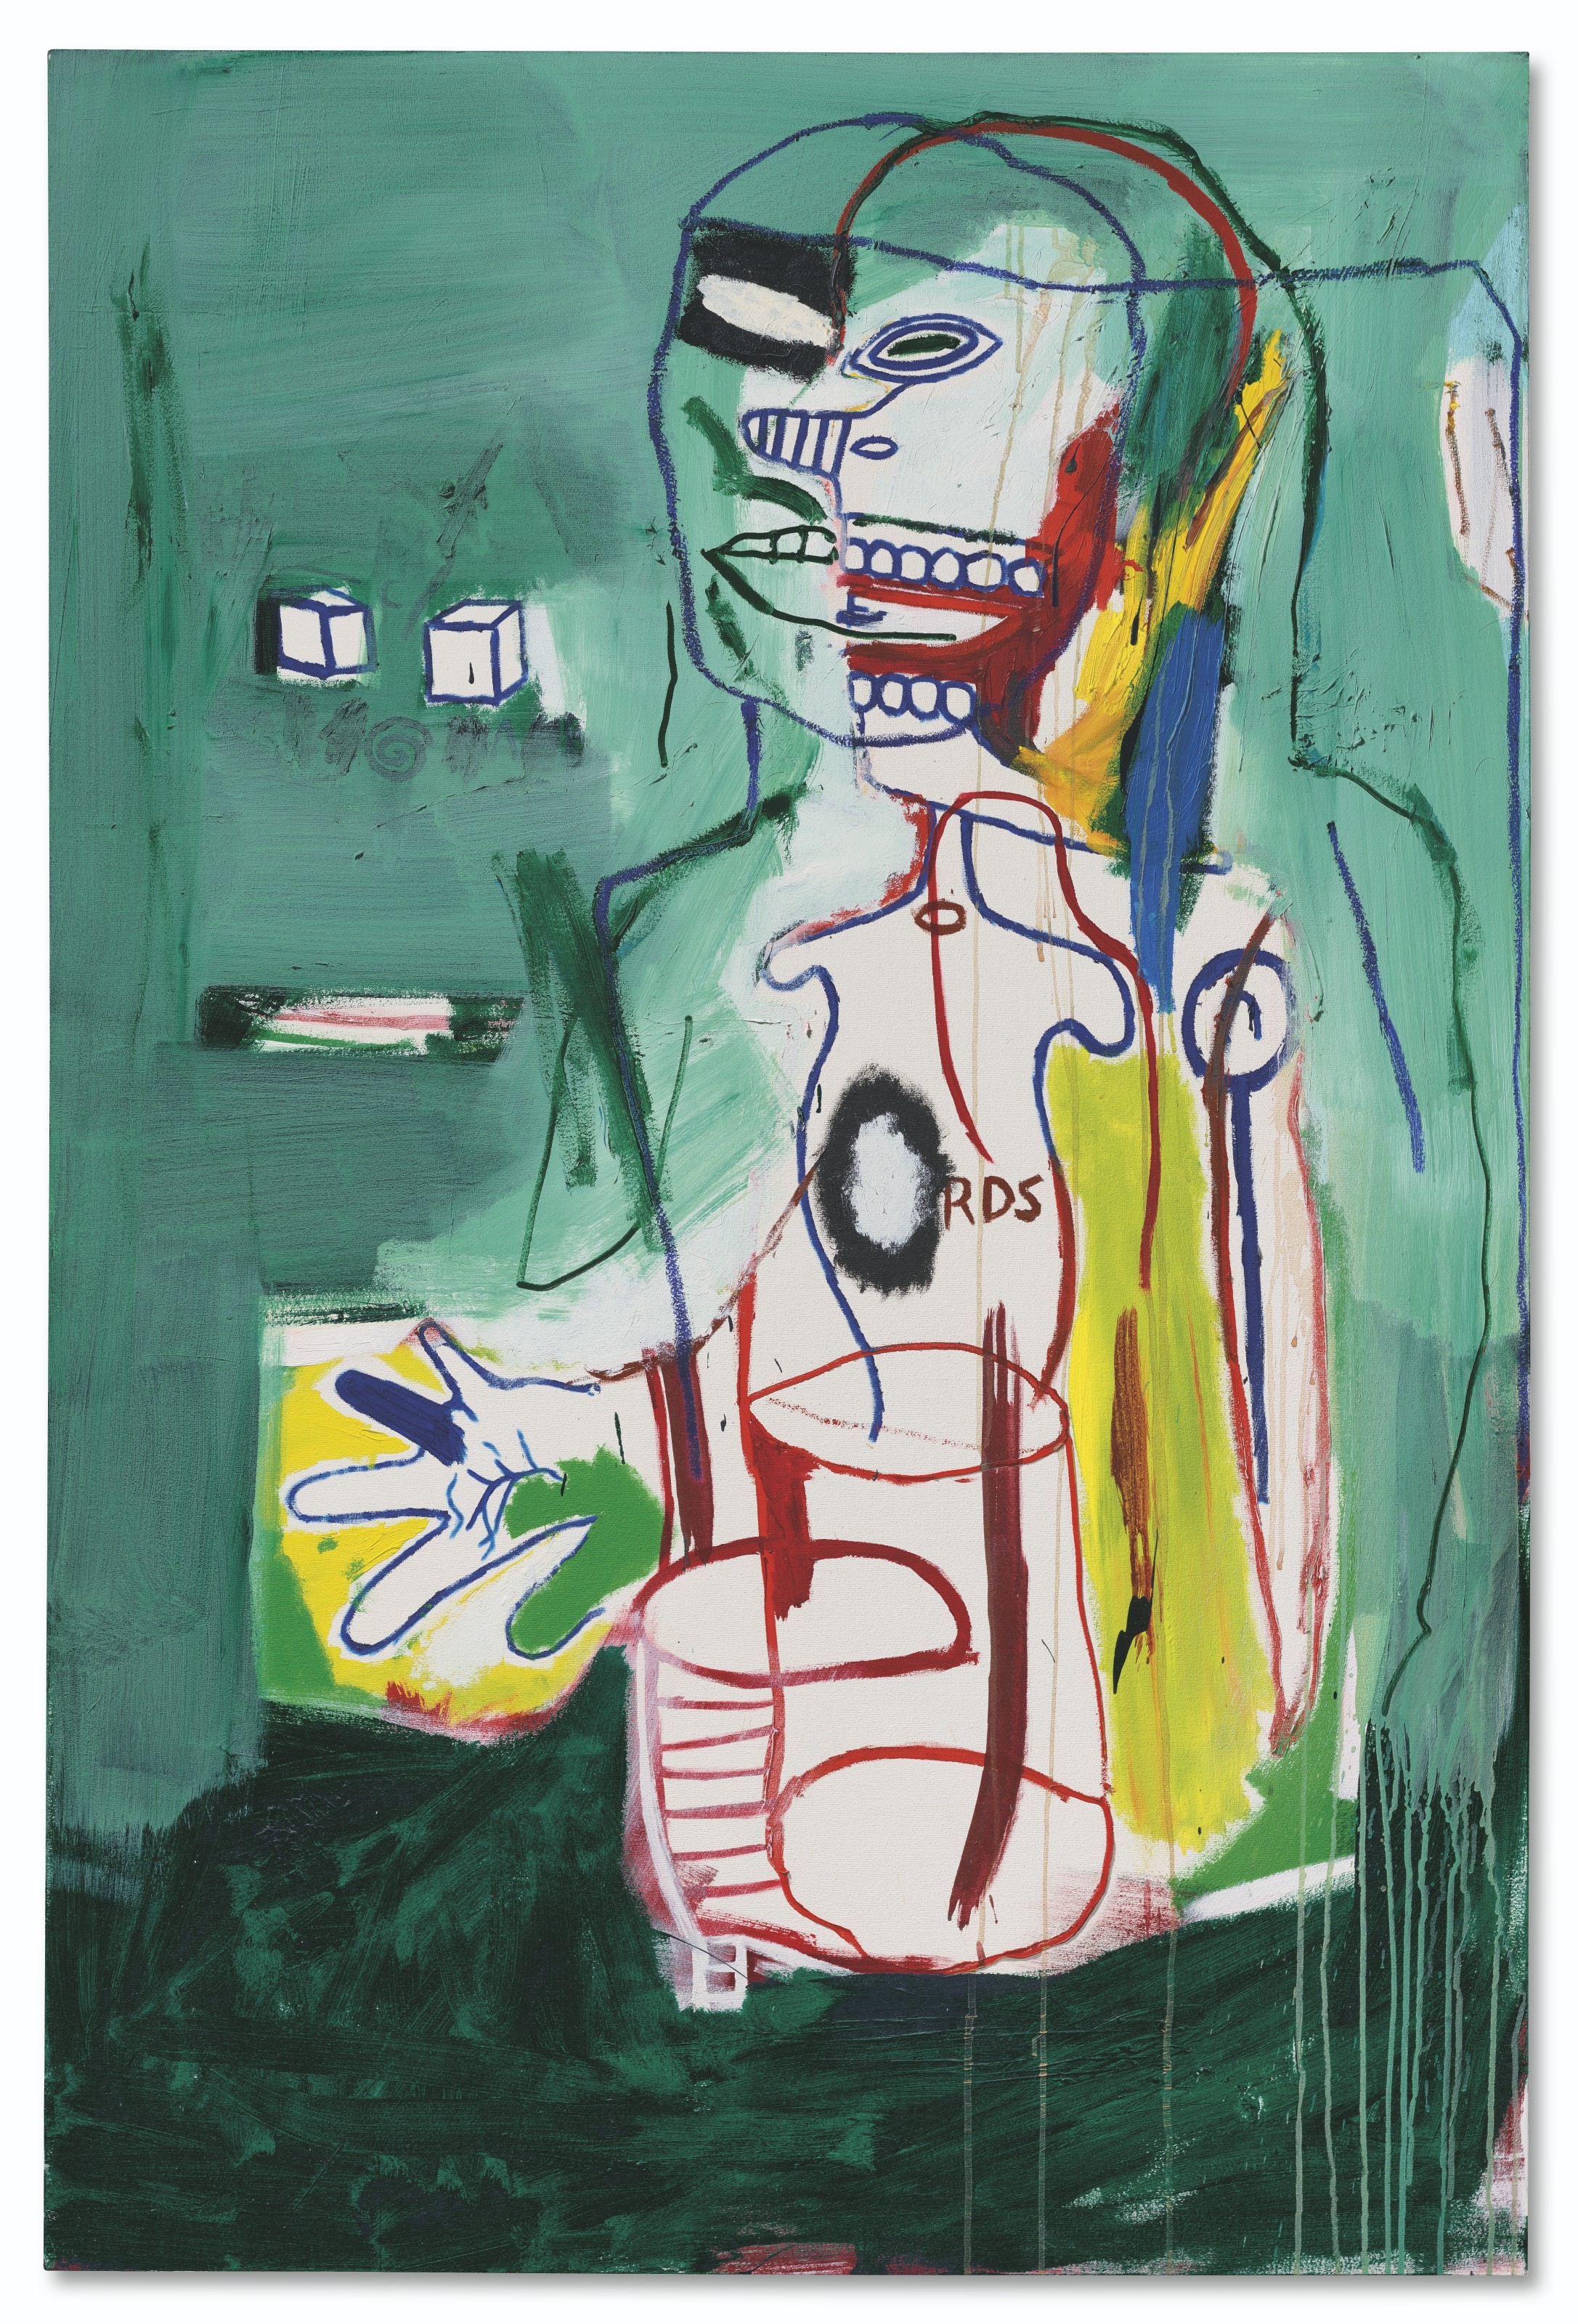 Untitled by Jean-Michel Basquiat, Painted in 1984